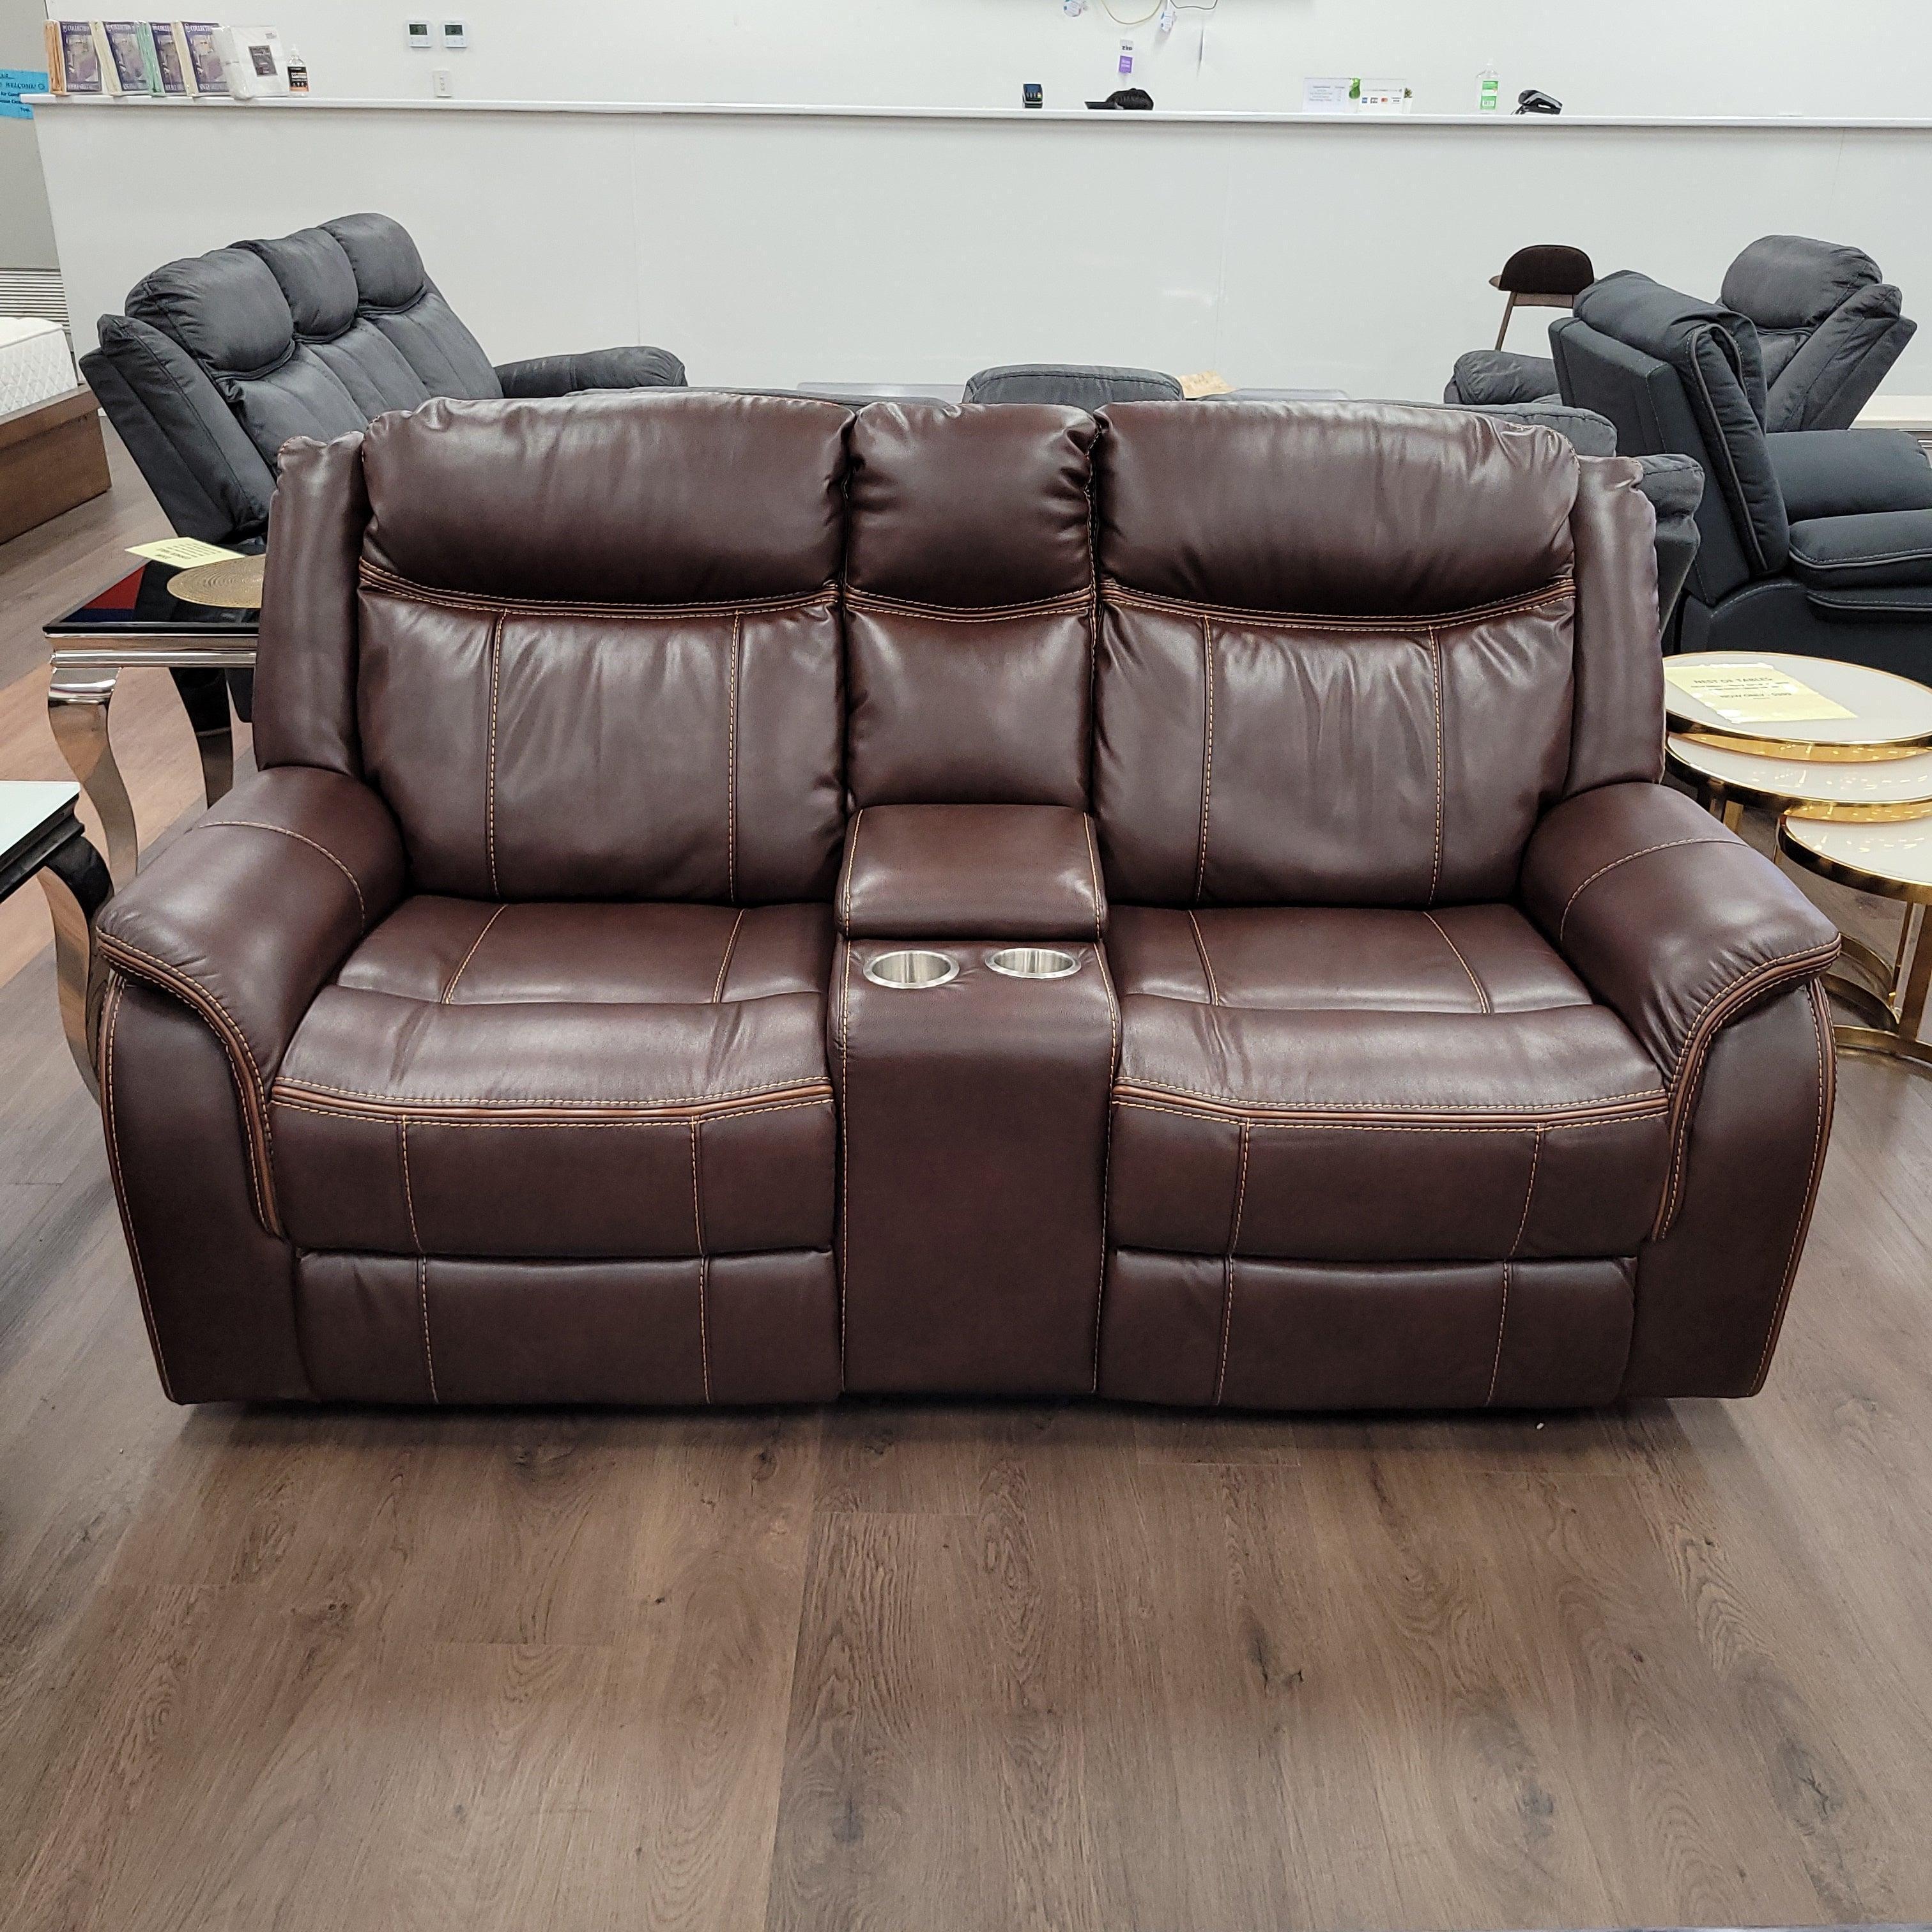 Sunshine 2 Seater Air Leather Recliner Lounge